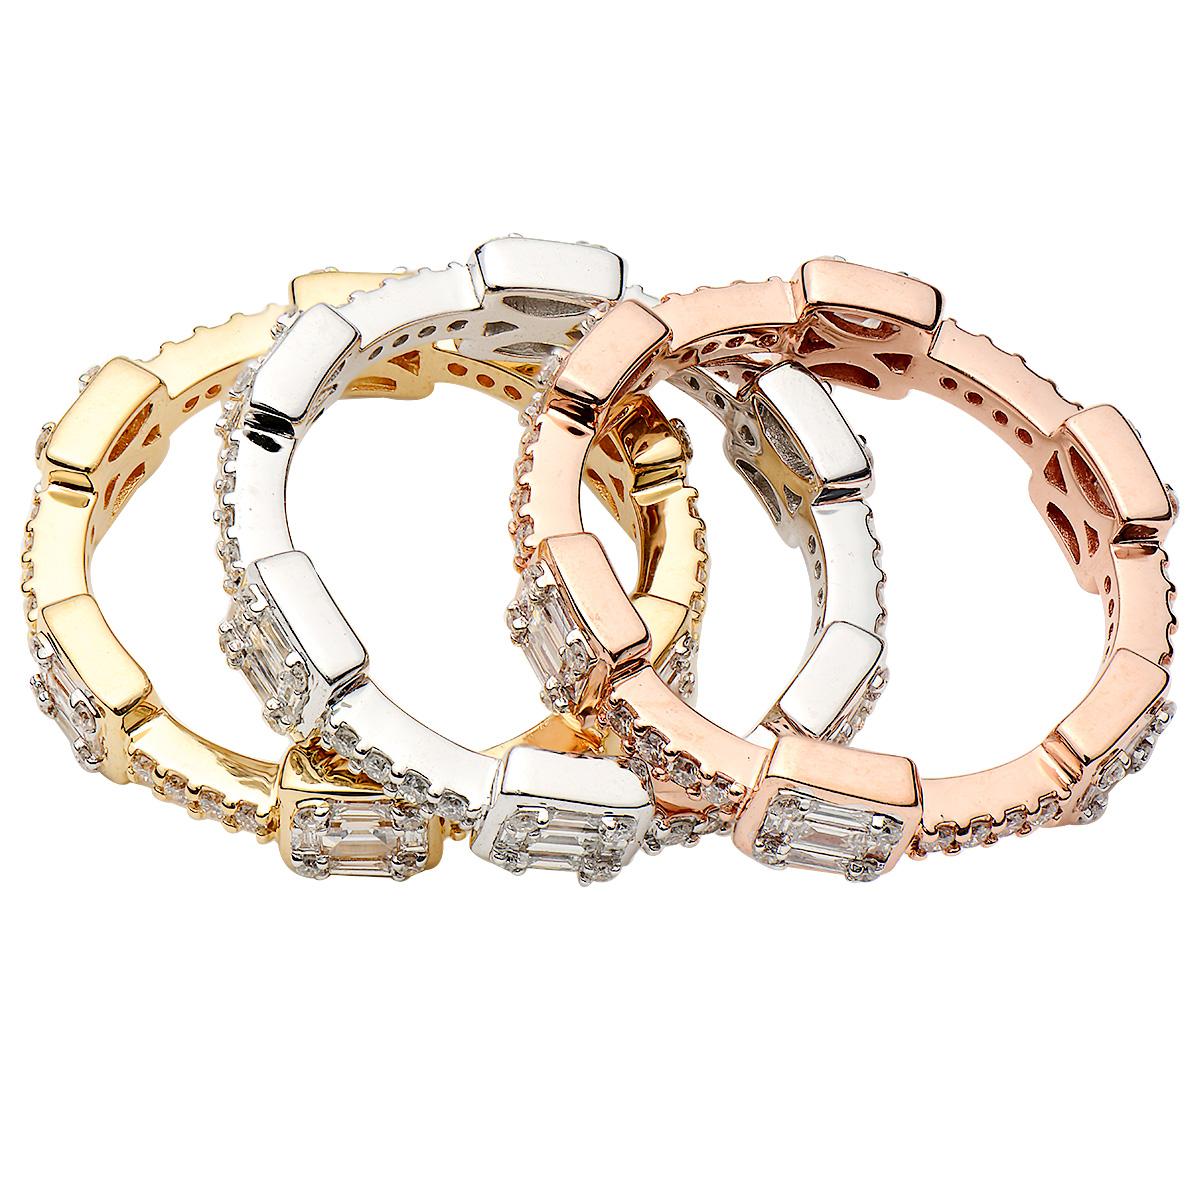 This stunning set of 3 rings, 1 of each 18 karat white gold, 18 karat rose gold, and 18 karat yellow gold perfectly stack together to create a gorgeous stacking ring. Each ring can also be worn alone for a single band look. The diamonds are